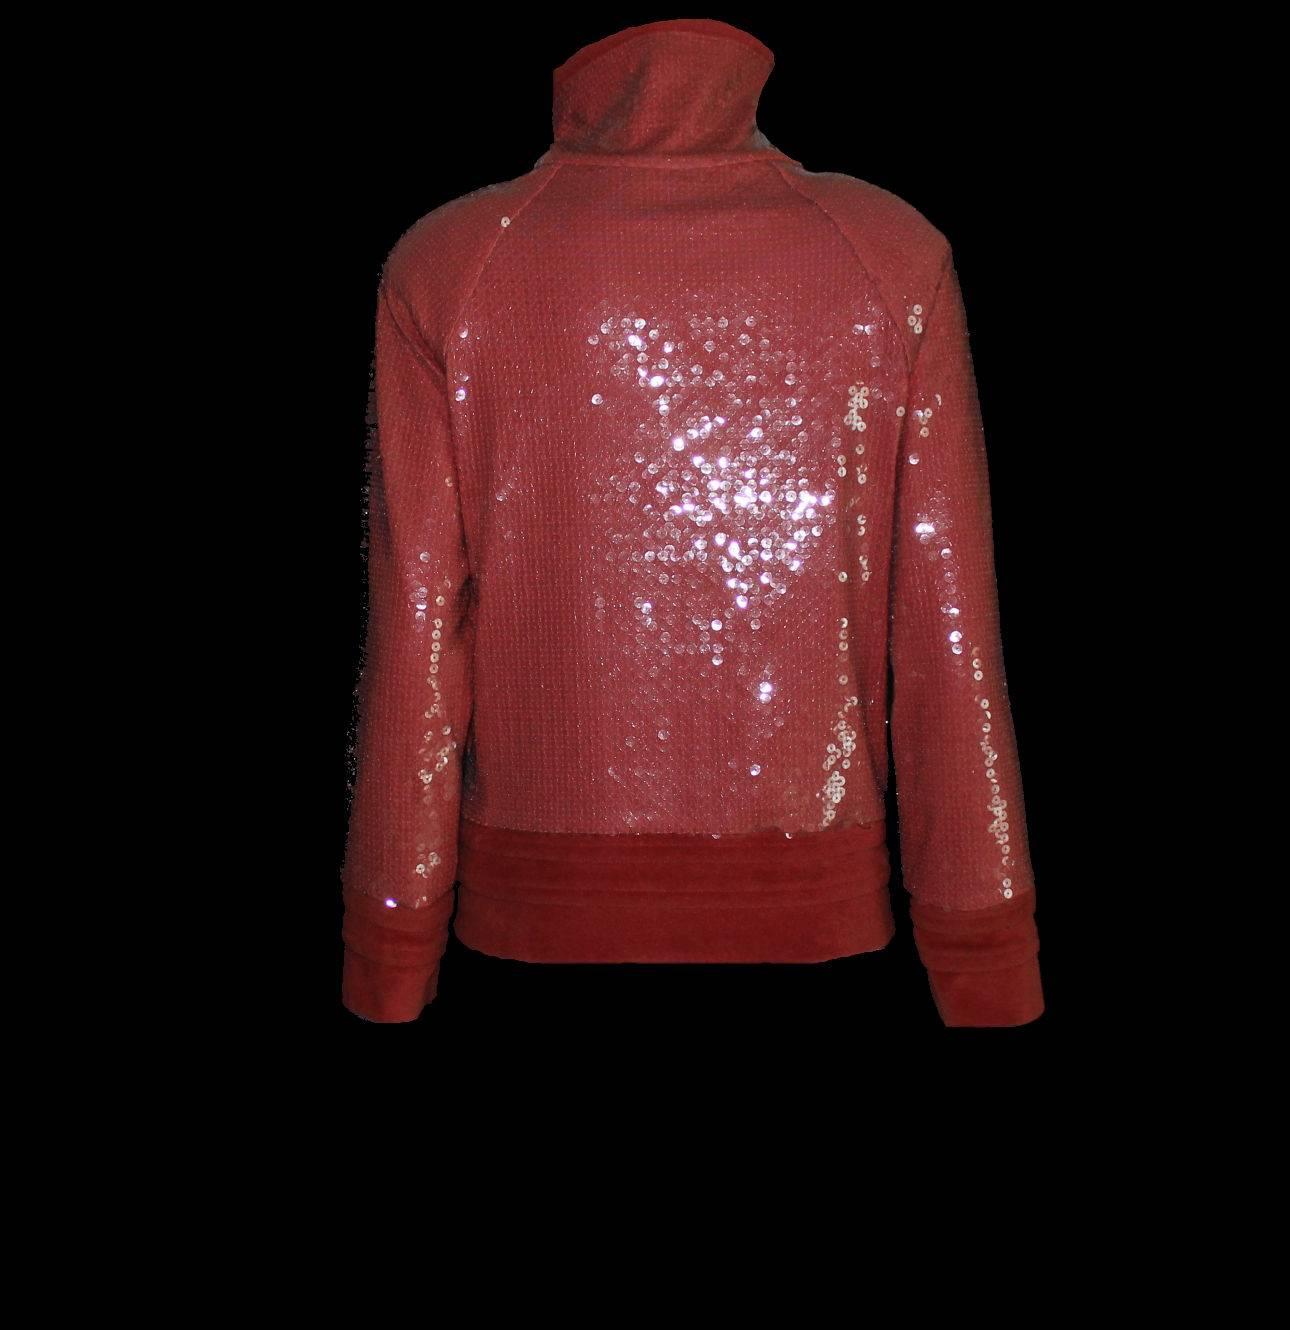 UNWORN Chanel Coral Sequin Embellished Terry Cloth Jacket 38 In Excellent Condition For Sale In Switzerland, CH